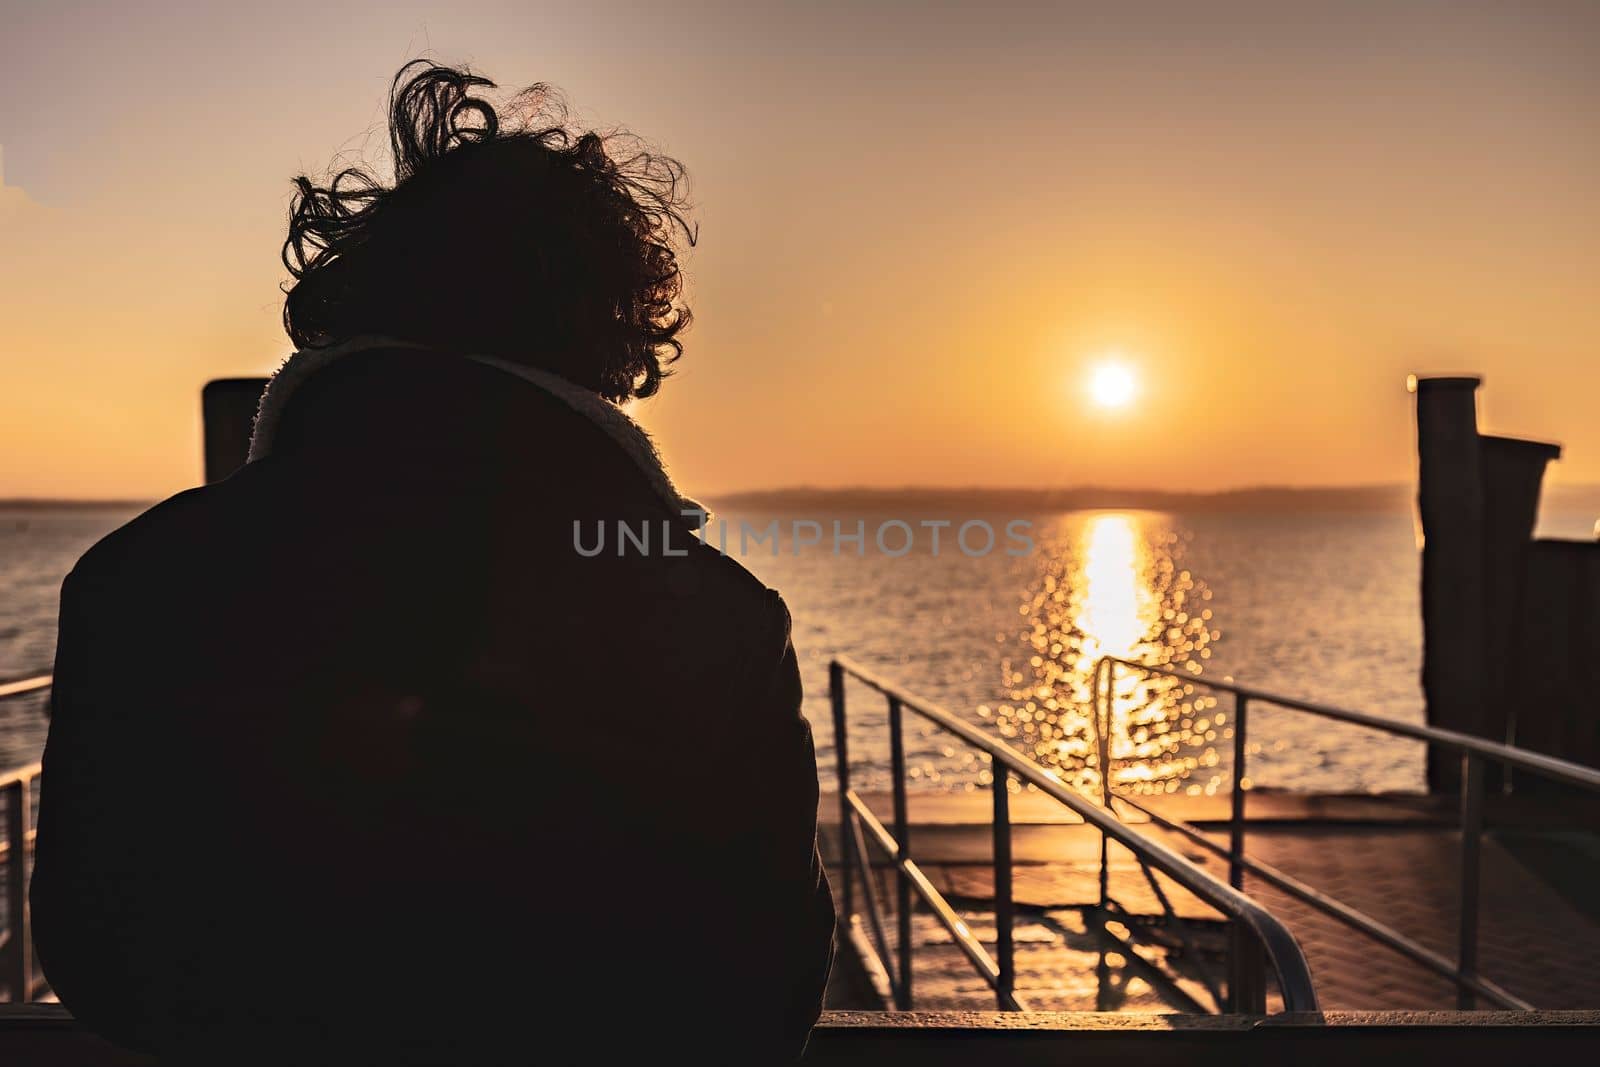 A young boy with his back turned, gazing thoughtfully at the sunset over a tranquil lake